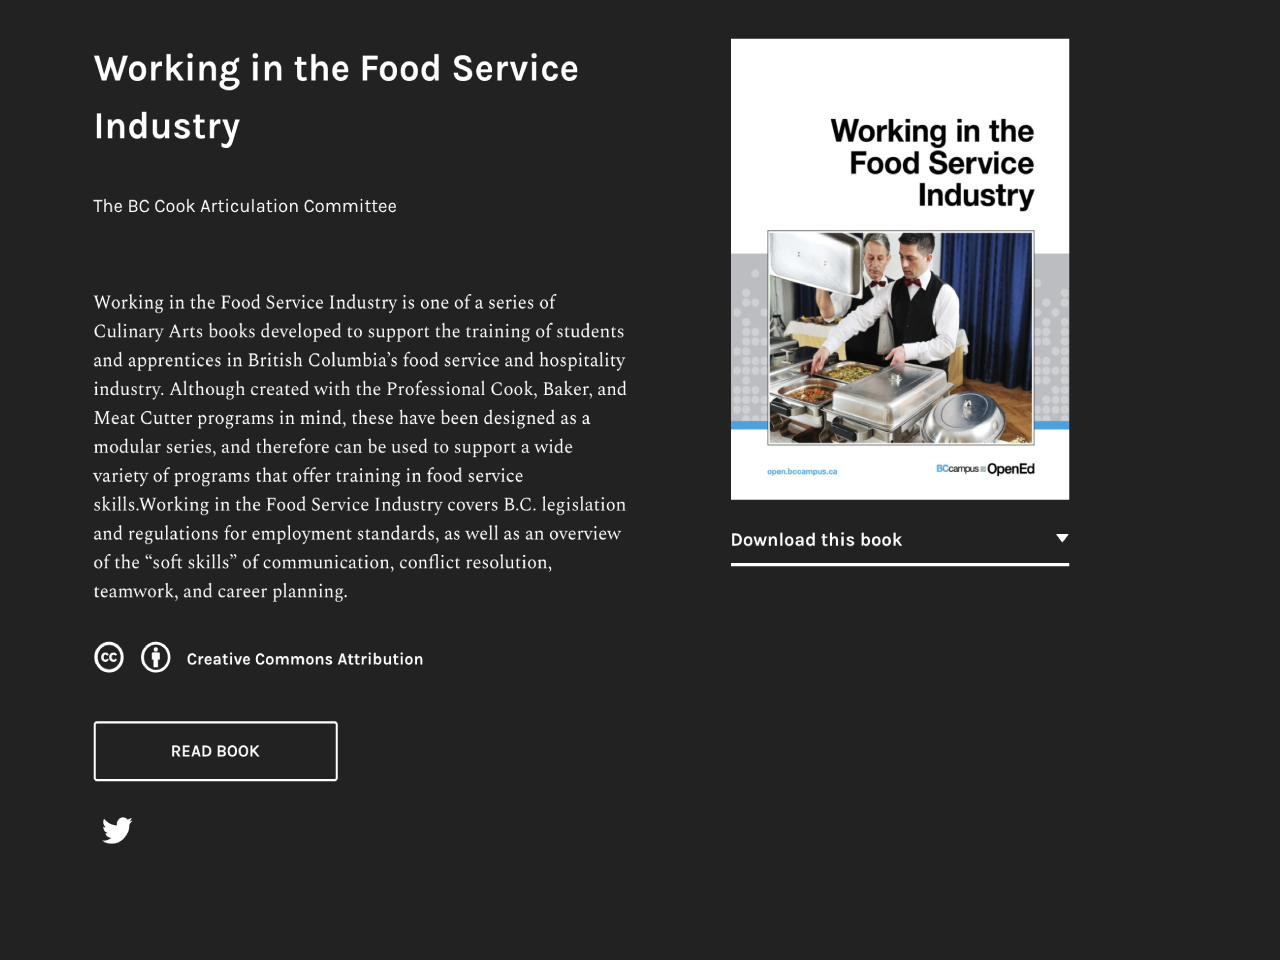 Working in the Food Service Industry